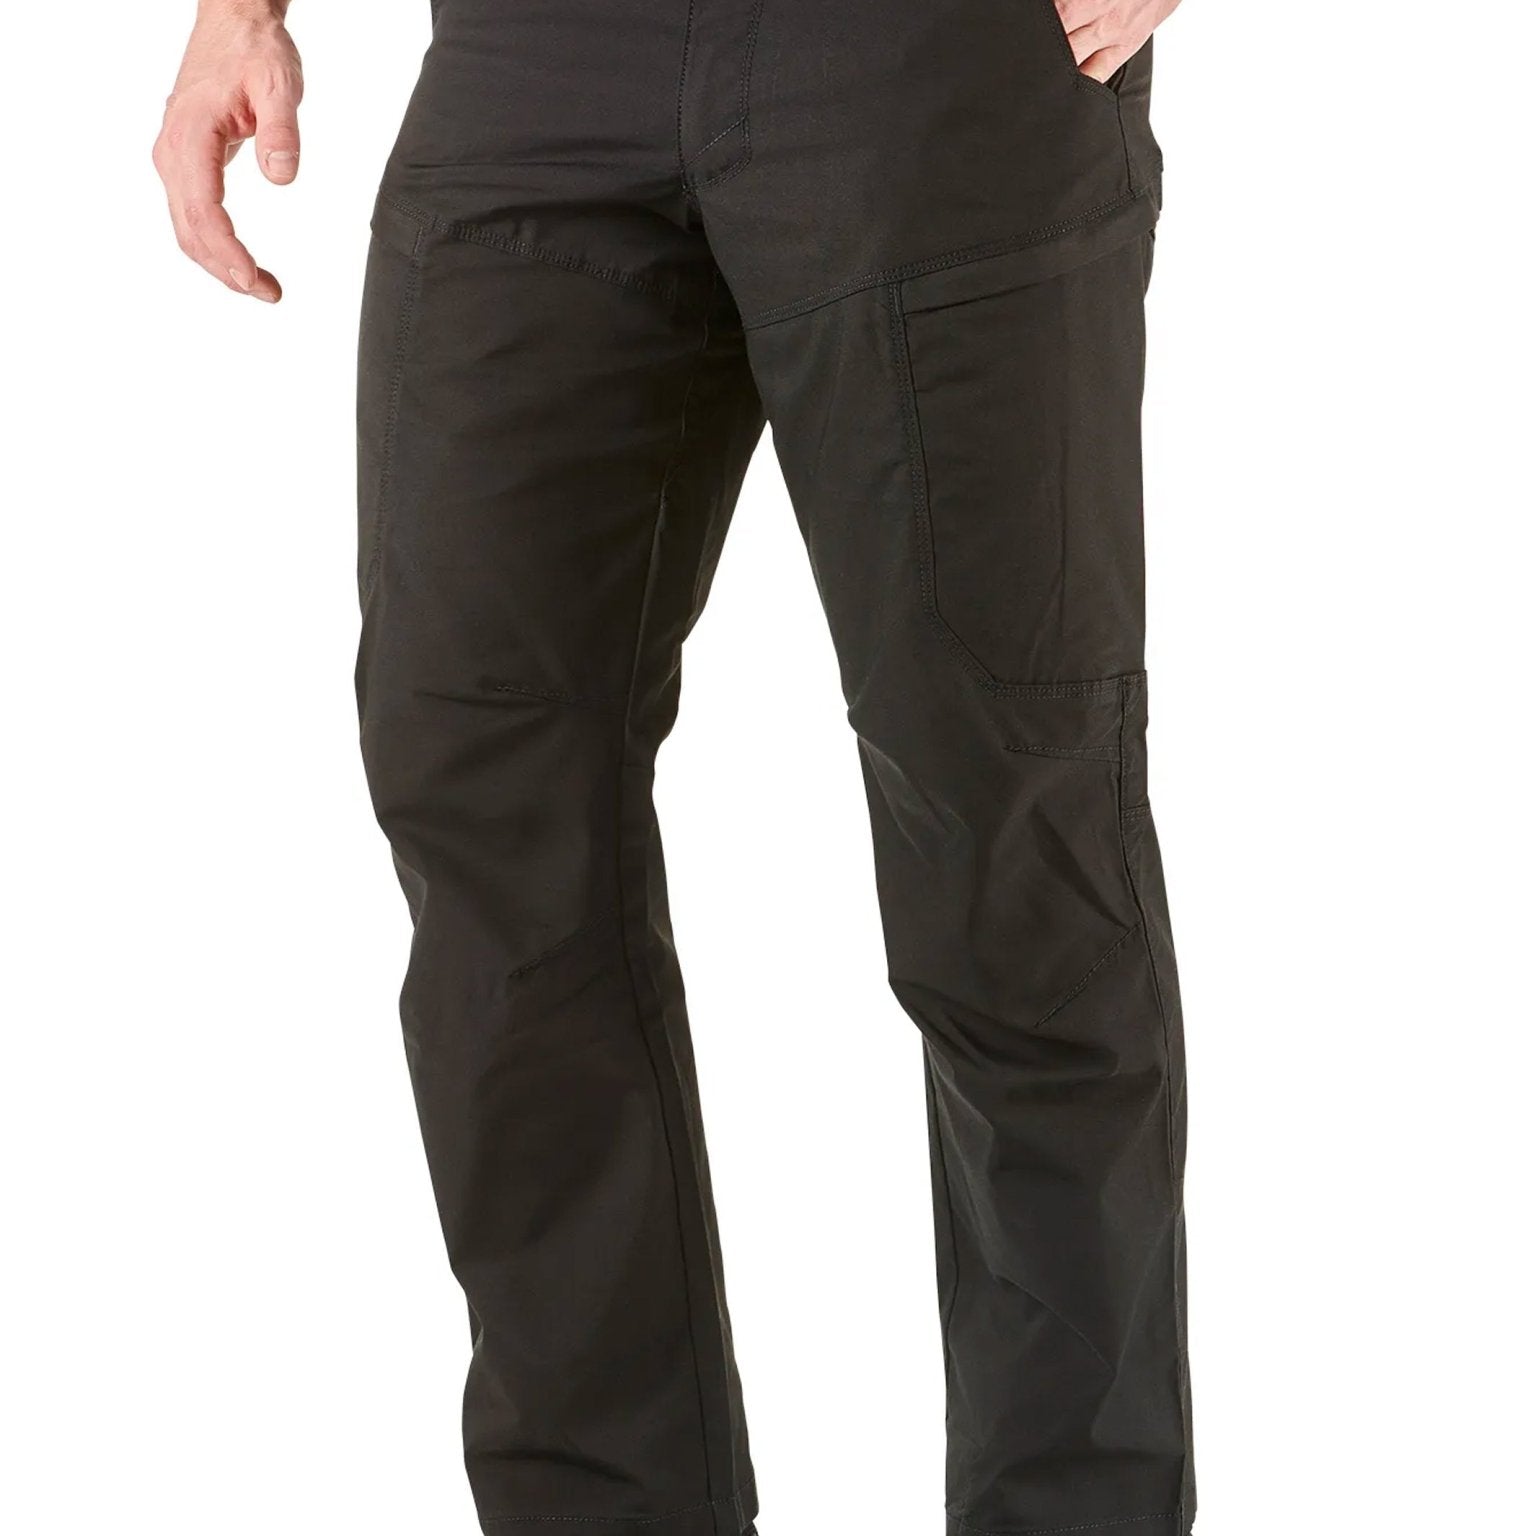 4elementsclothing5.11 Tactical5.11 Tactical - 5.11 APEX® PANT - Mens Apex trouser, 10 pockets, Teflon finished, cuff pocket - Style 74434Trousers & Jeans74434-019-30Wx30L